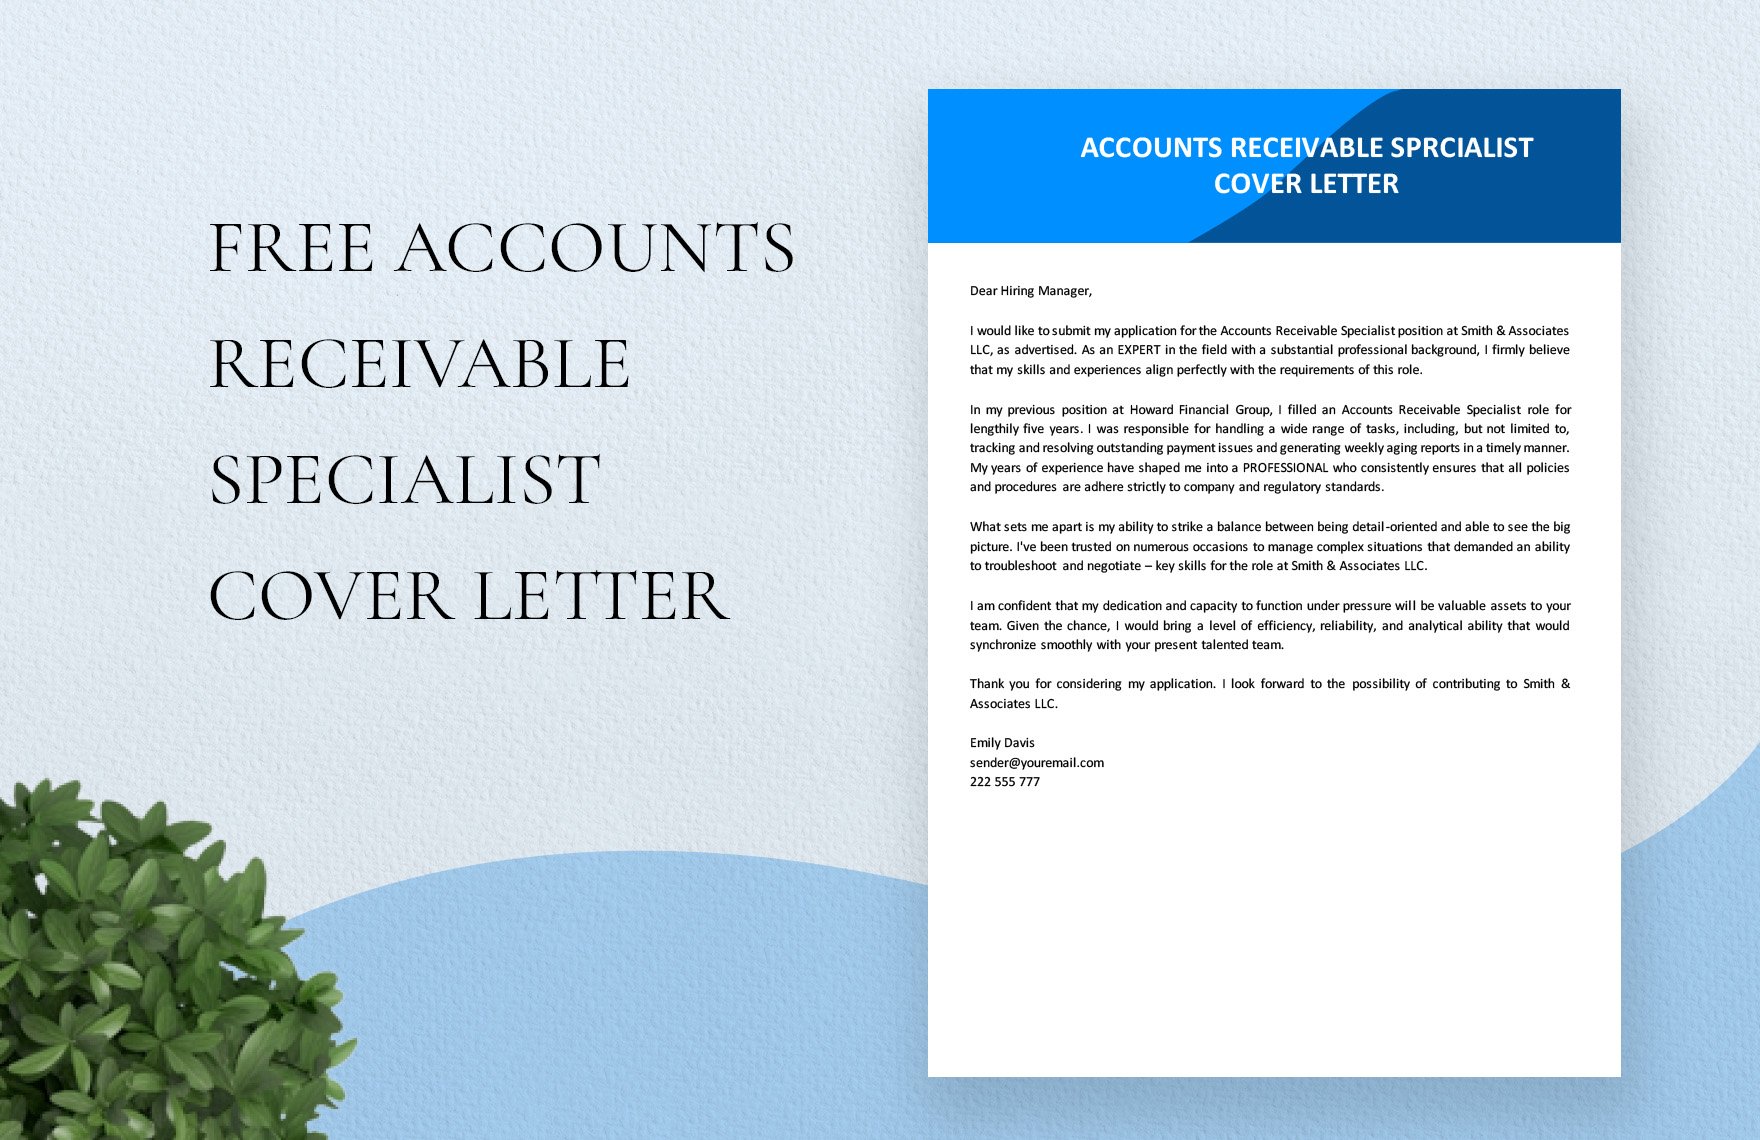 Accounts Receivable Specialist Cover Letter in Word, Google Docs, PDF